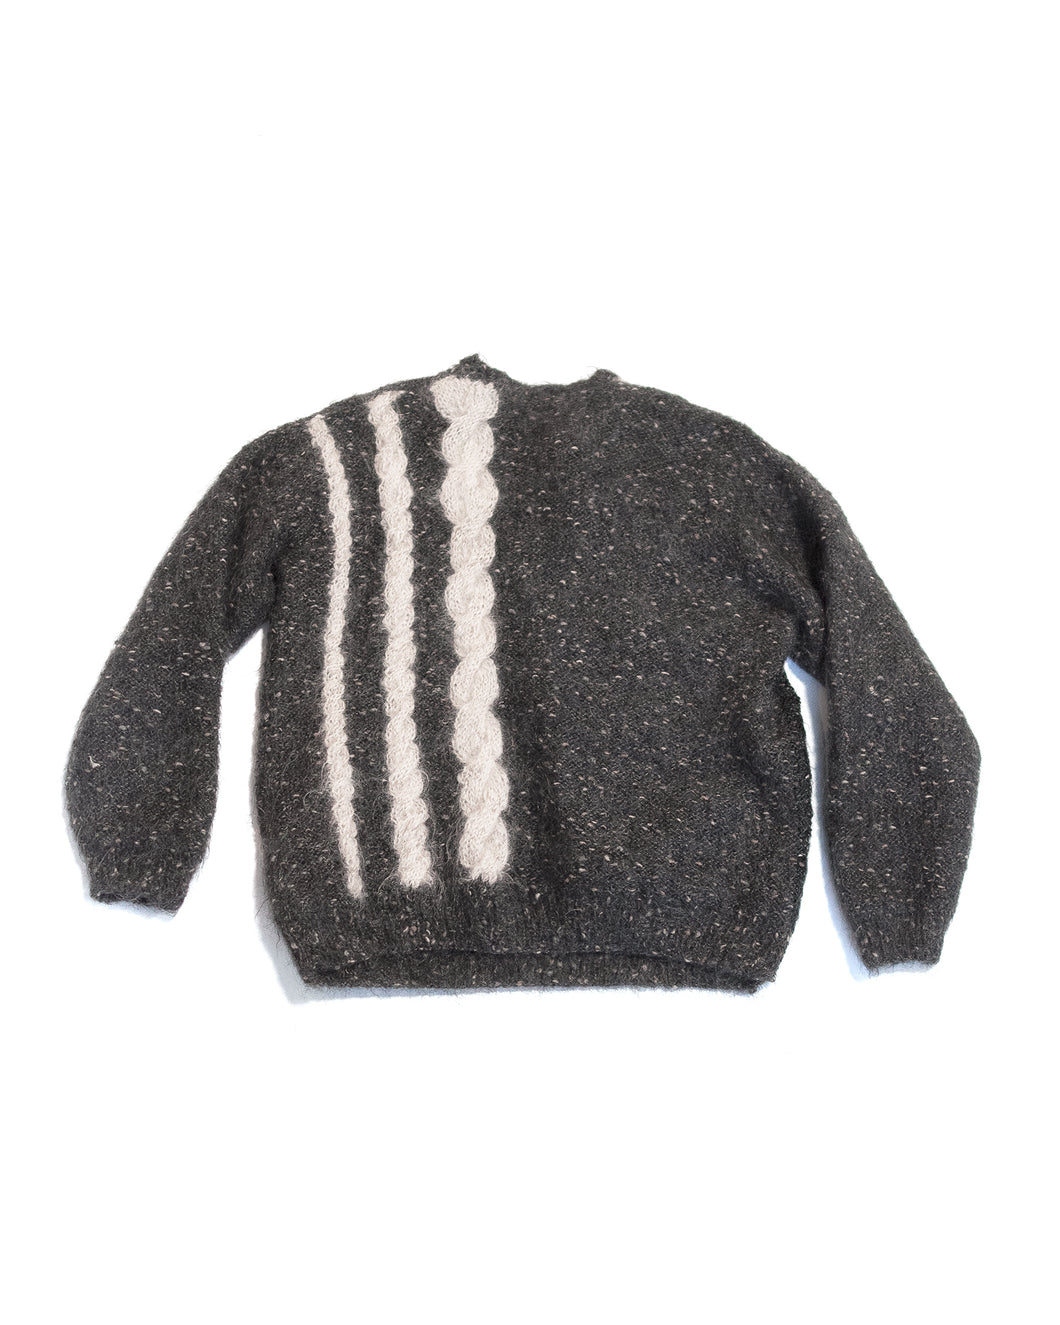 Cableknit Mohair Sweater Grey White